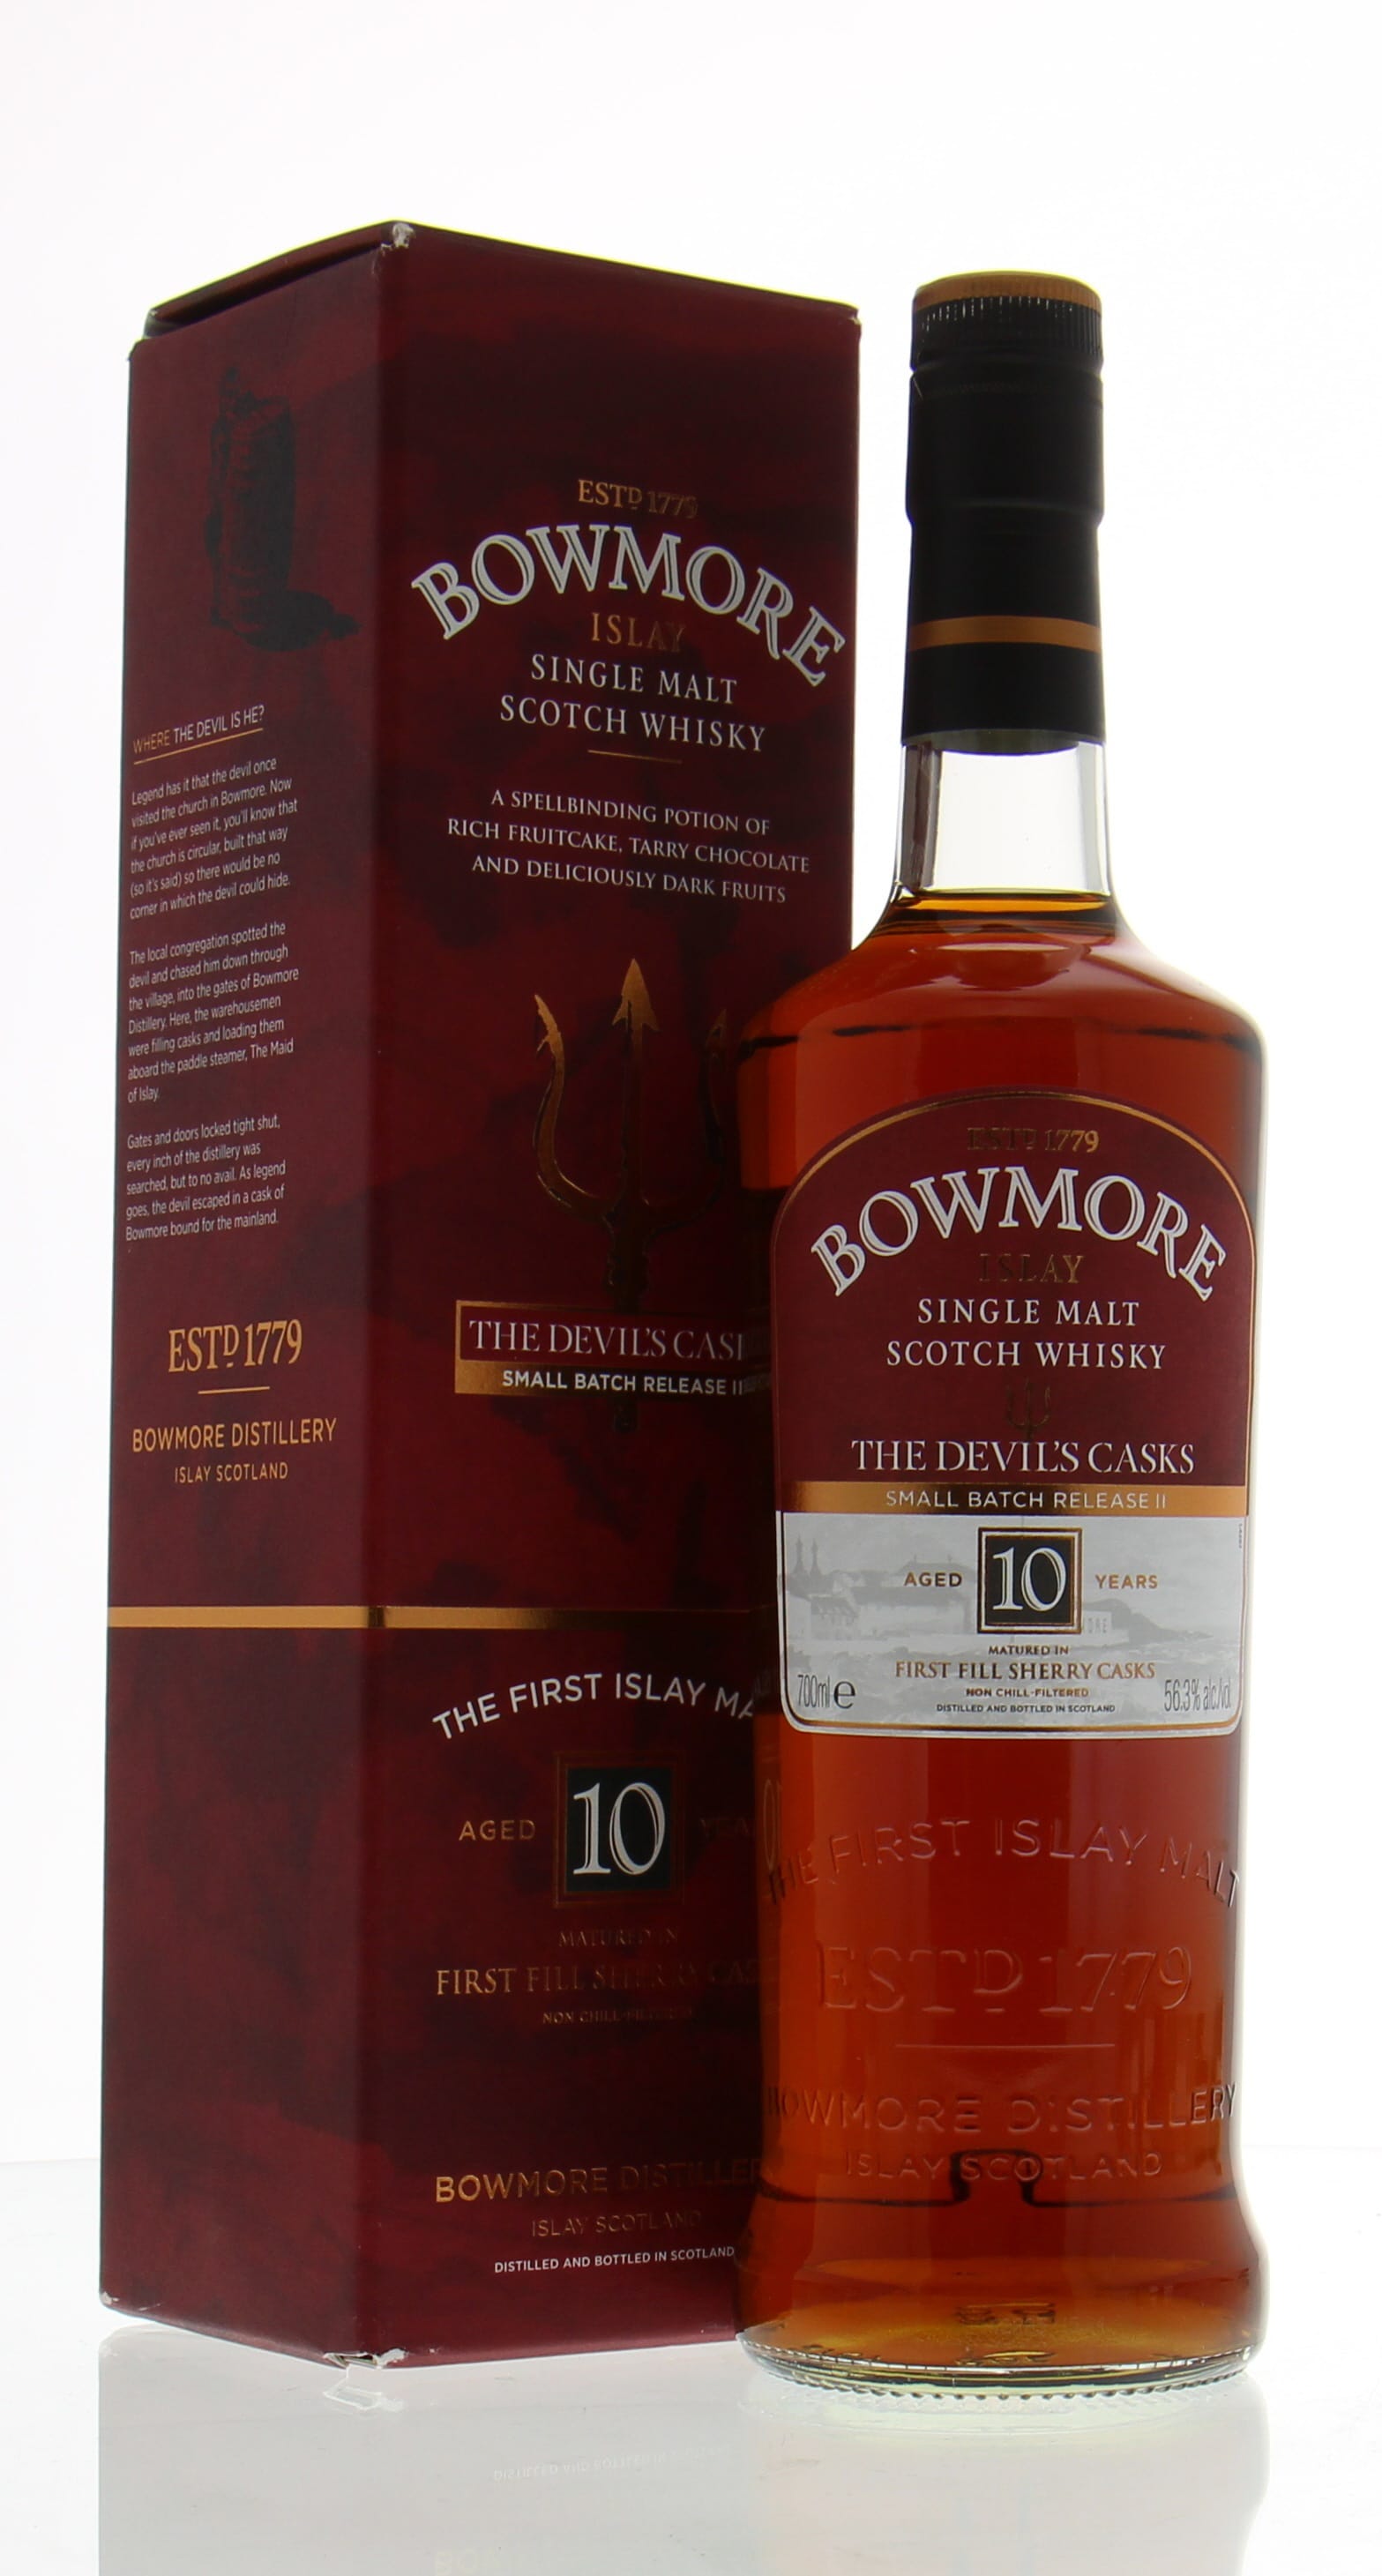 Bowmore - The Devil's Cask 2nd release 10 years old 56.3% NV